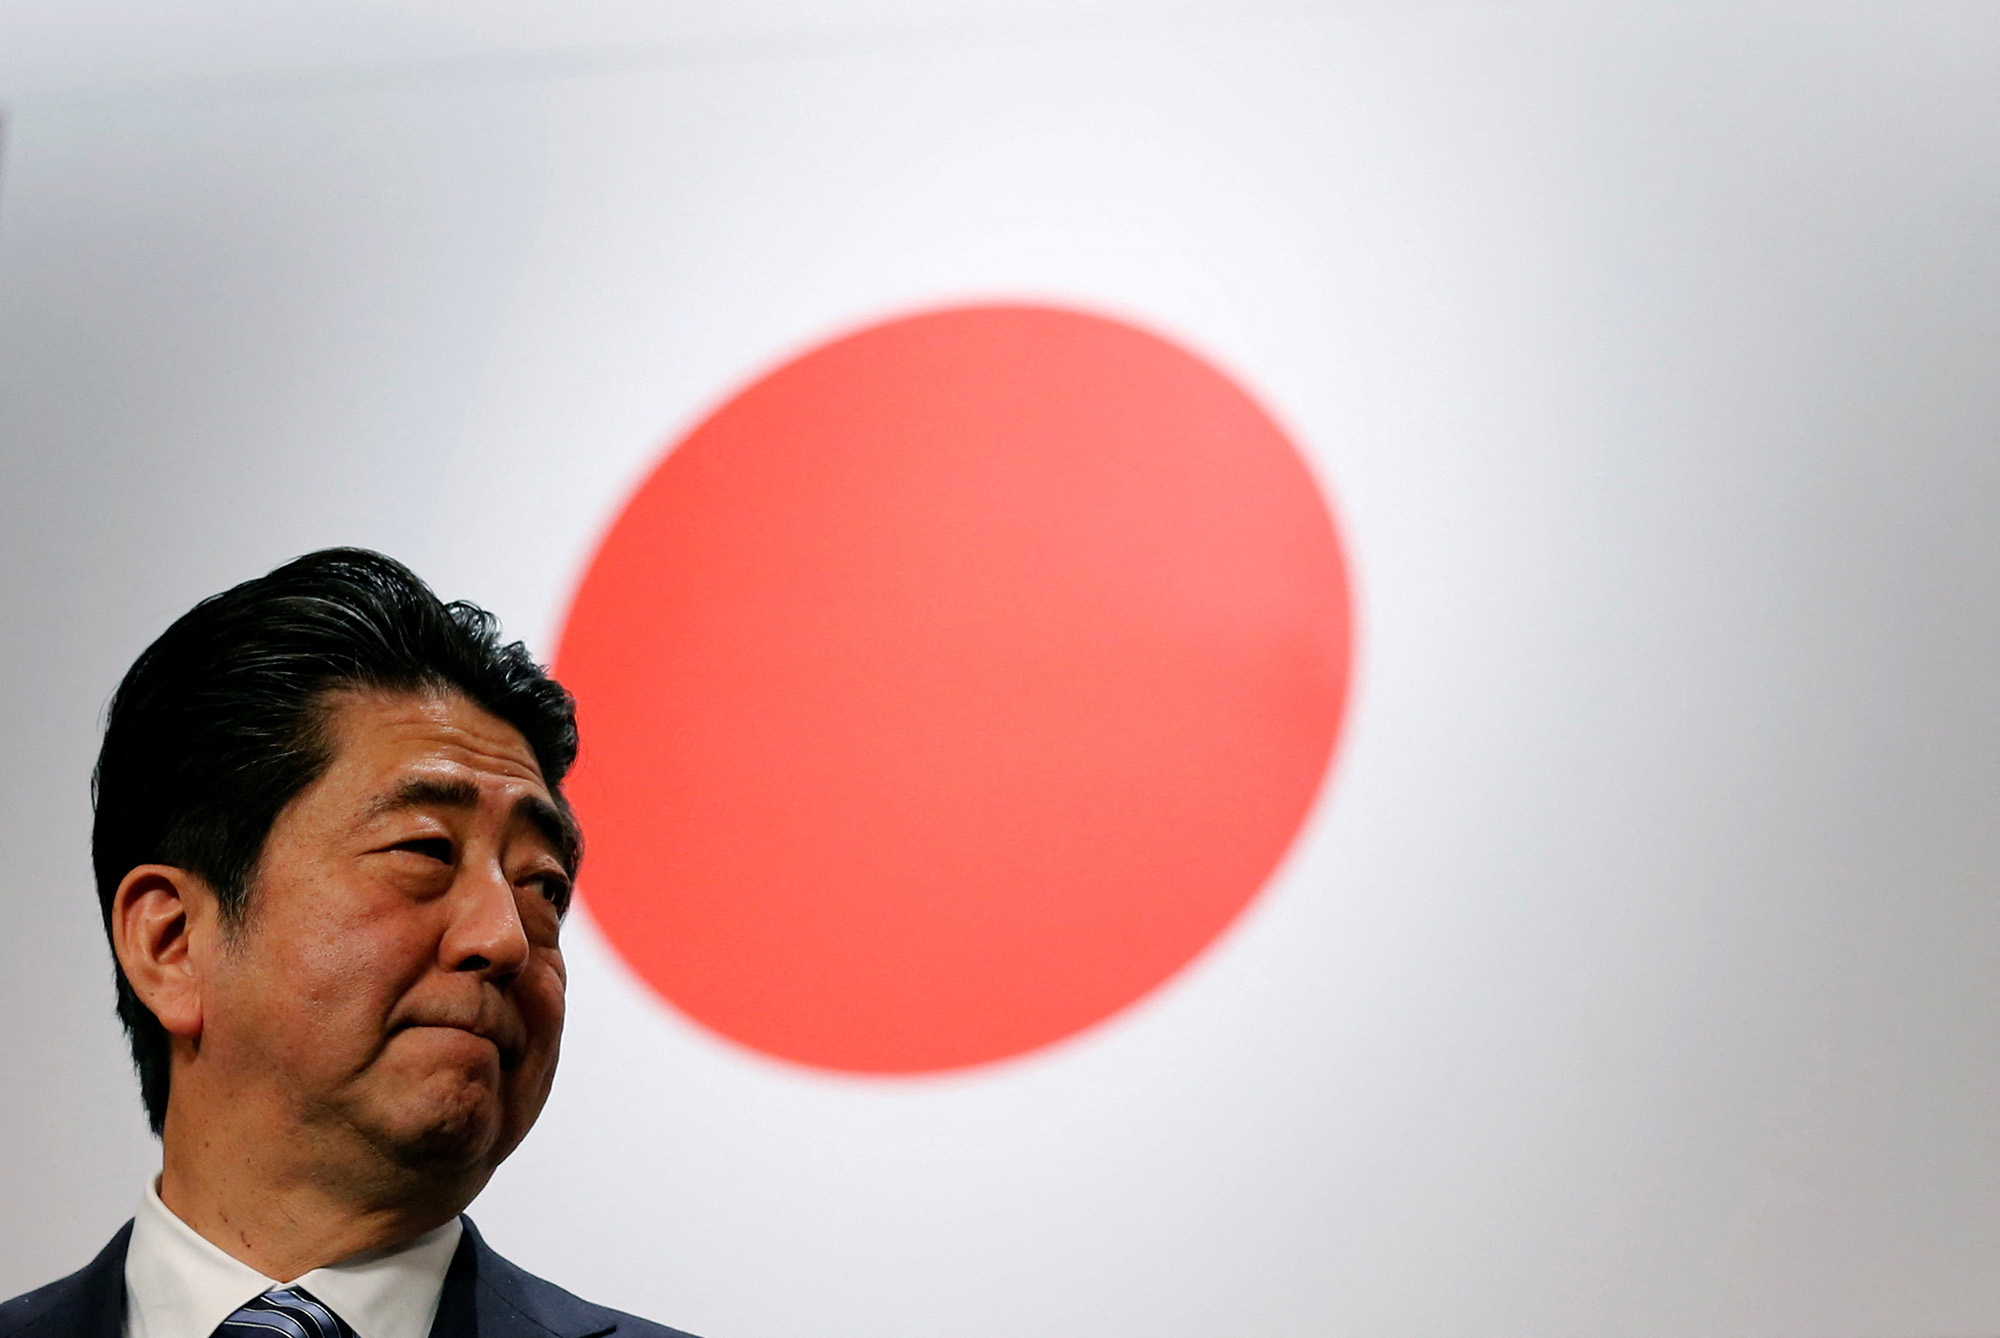 Then-Prime Minister Shinzo Abe stands in front of Japan's national flag after his ruling Liberal Democratic Party's (LDP) annual convention in Tokyo on March 5, 2017. 